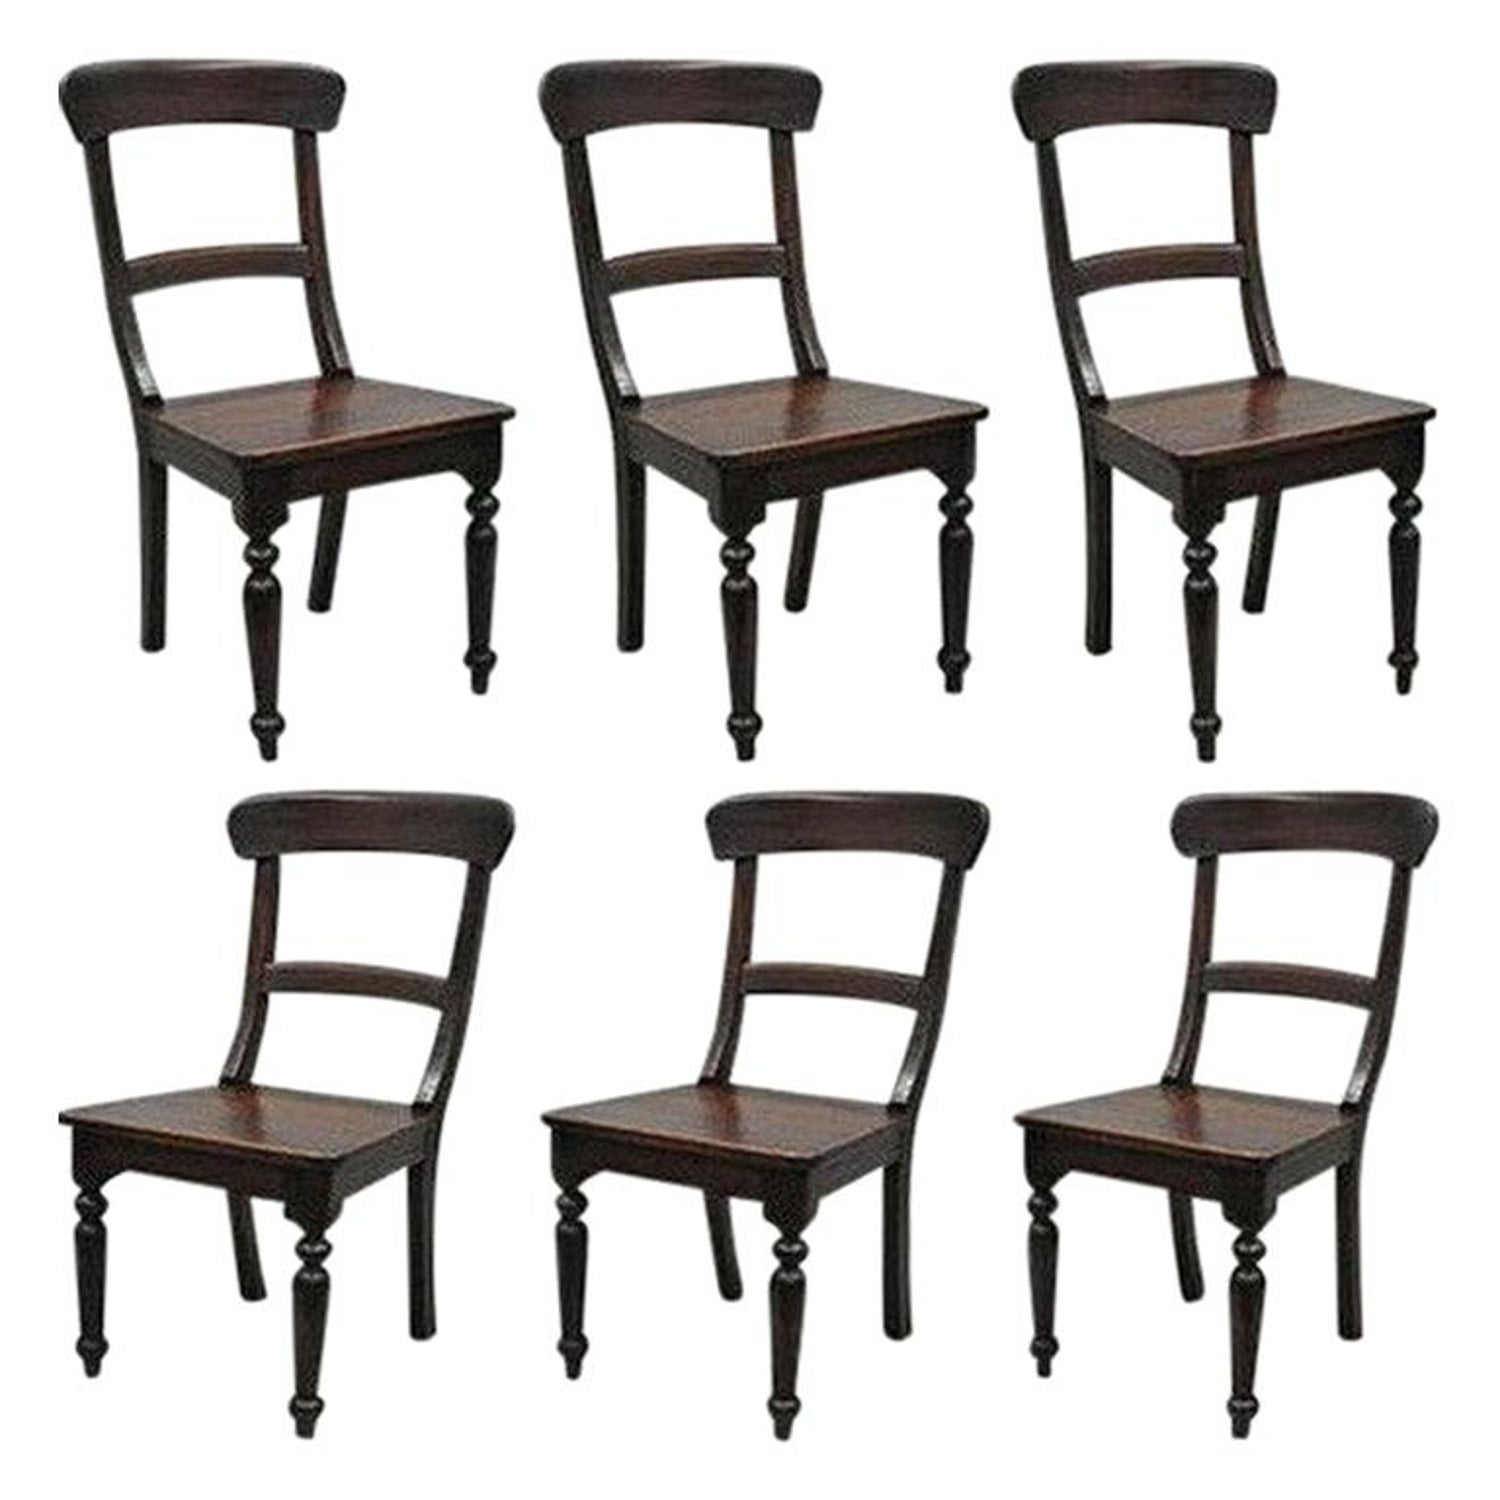 Barrel Back Dining Chairs 13 For Sale On 1stdibs